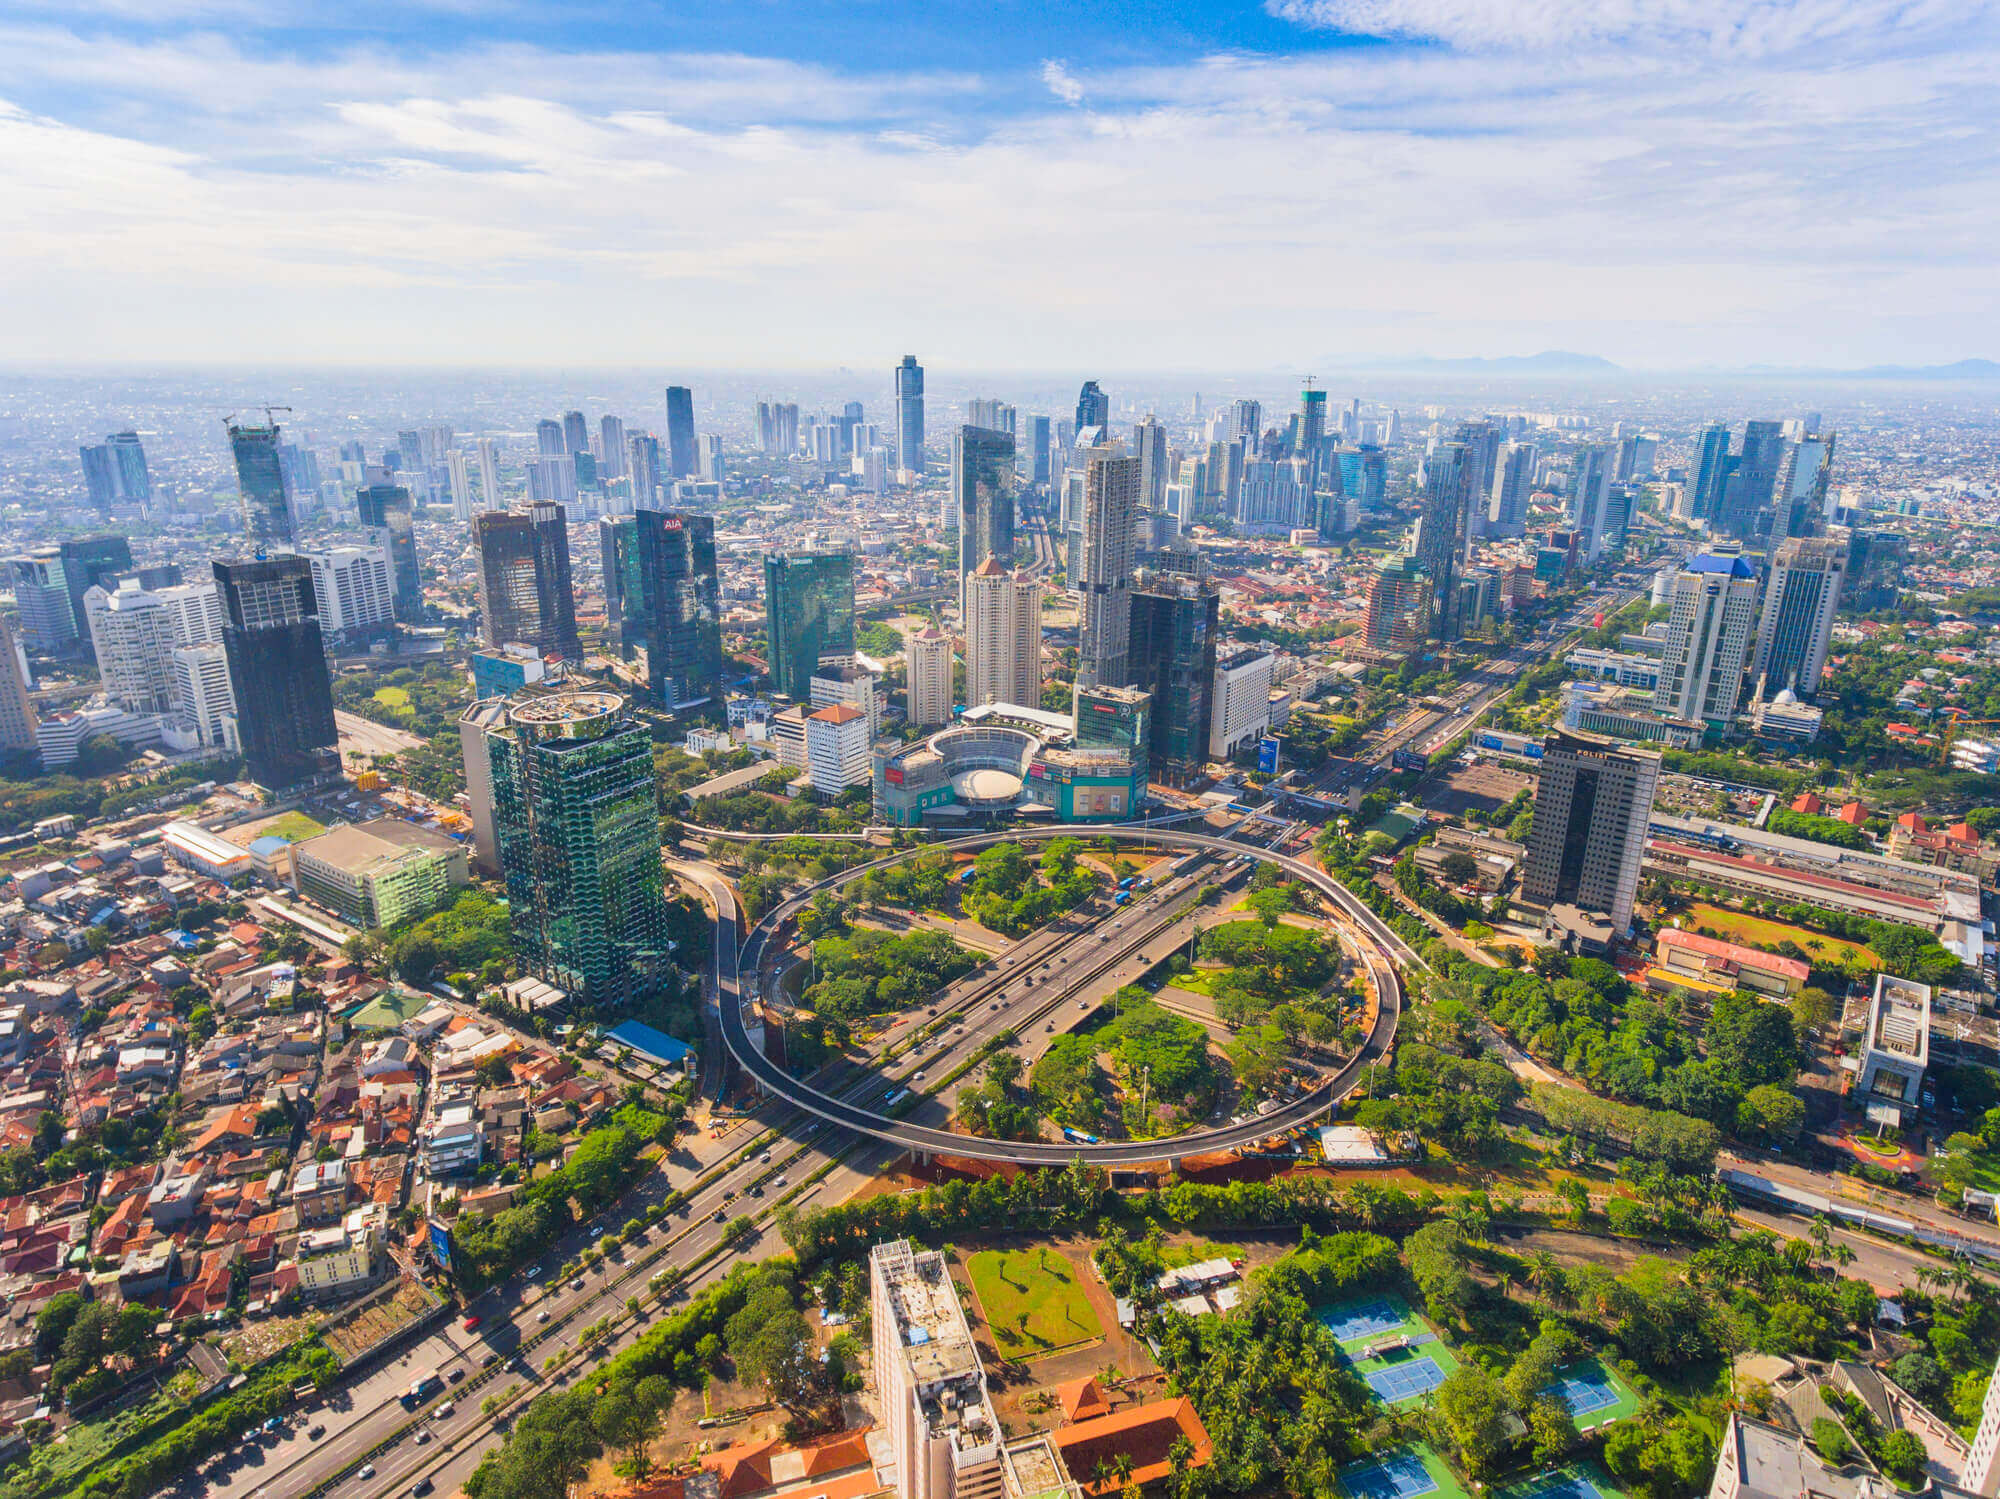 overview of Jakarta, Indonesia